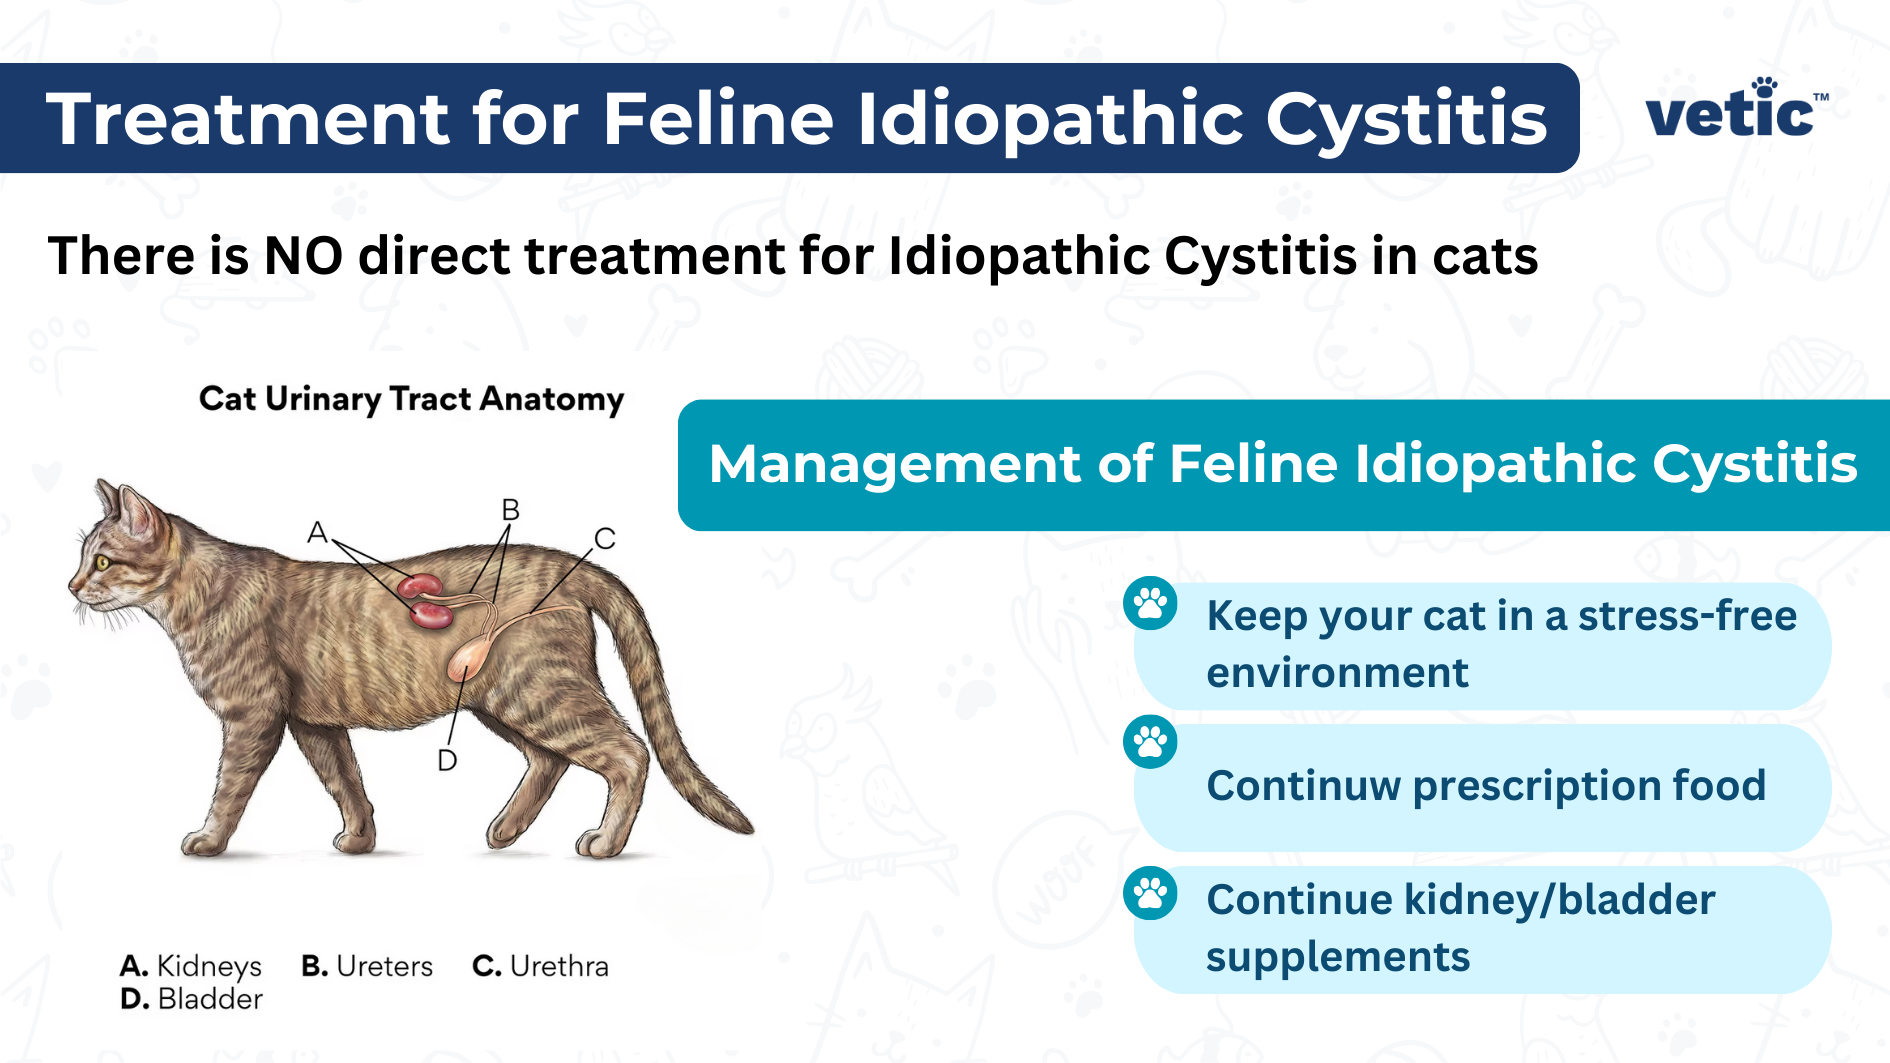 ingraphic on Treatment for feline idopathic cystitis in cats. Treatment of Feline Idiopathic Cystitis There is NO direct treatment for Idiopathic Cystitis in cats Management of Feline Idiopathic Cystitis Keep your cat in a stress-free environment Maintain prescription food Continue kidney/bladder supplements